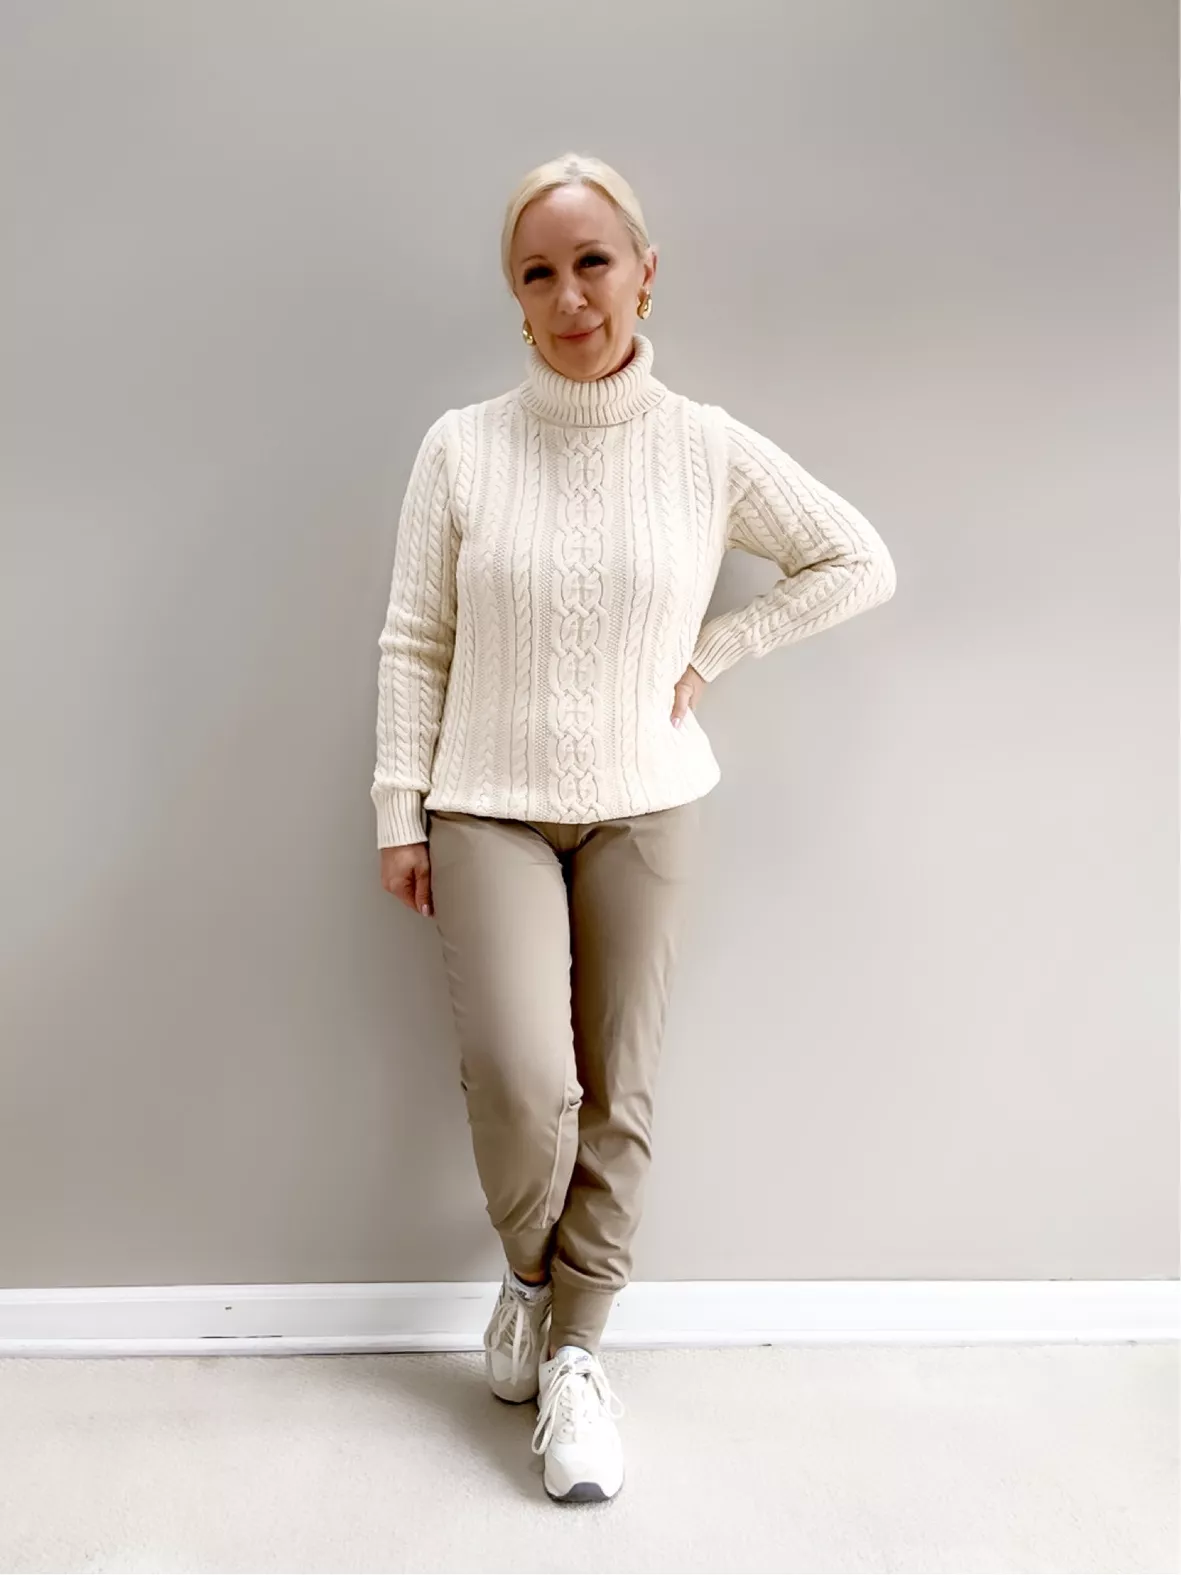 Essentials Women's Fisherman Cable Turtleneck Sweater (Available in  Plus Size)